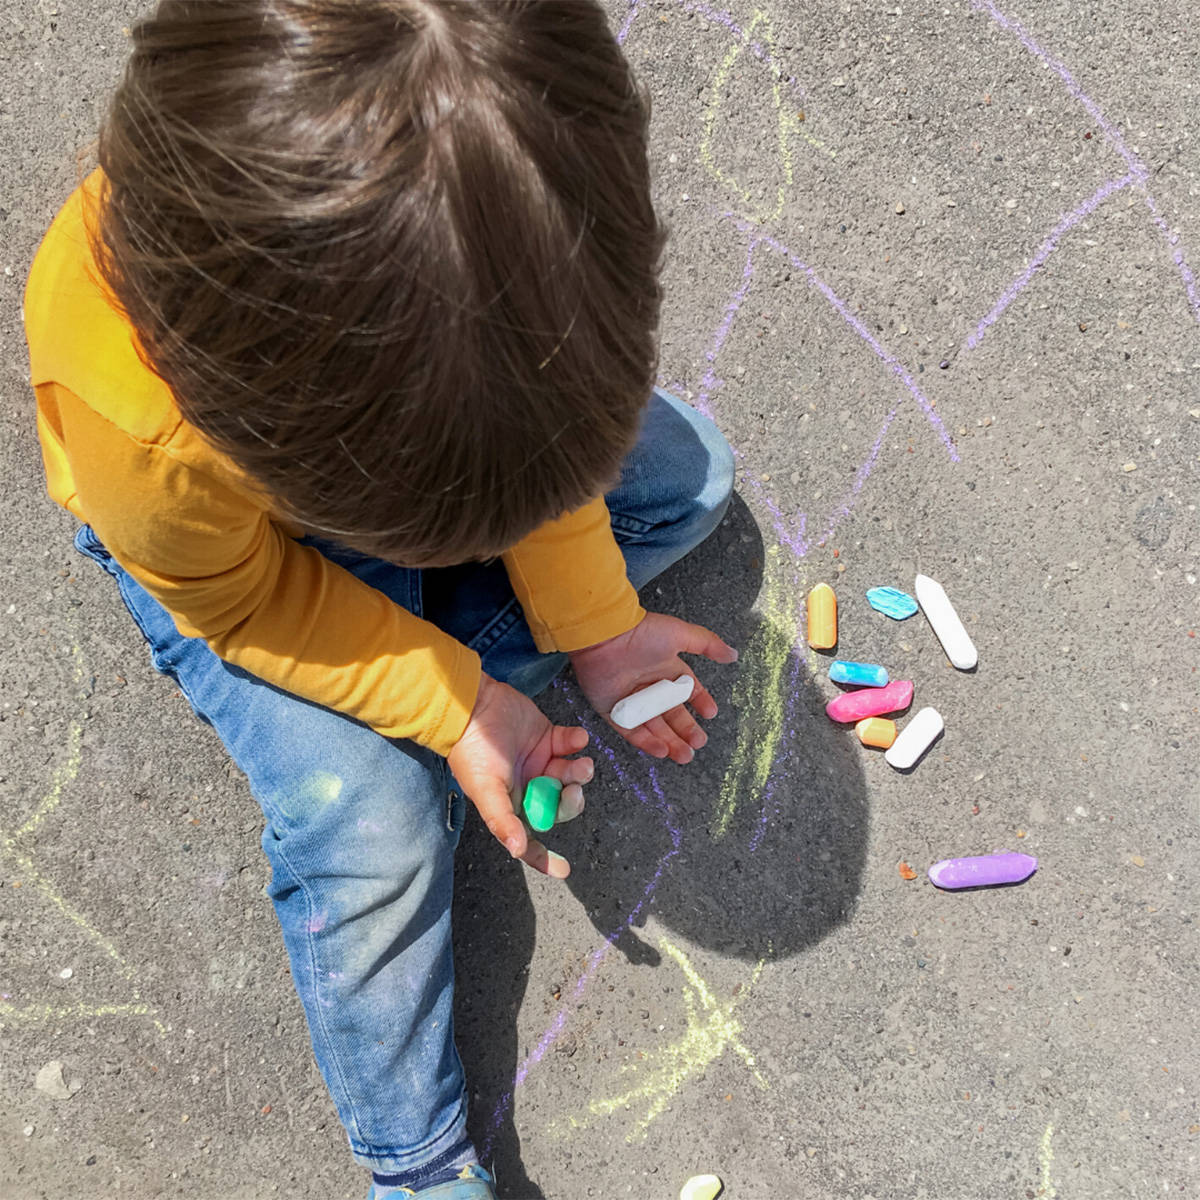 Skye Canyon will host its second annual, socially distant community event, Chalk For Earth on A ...